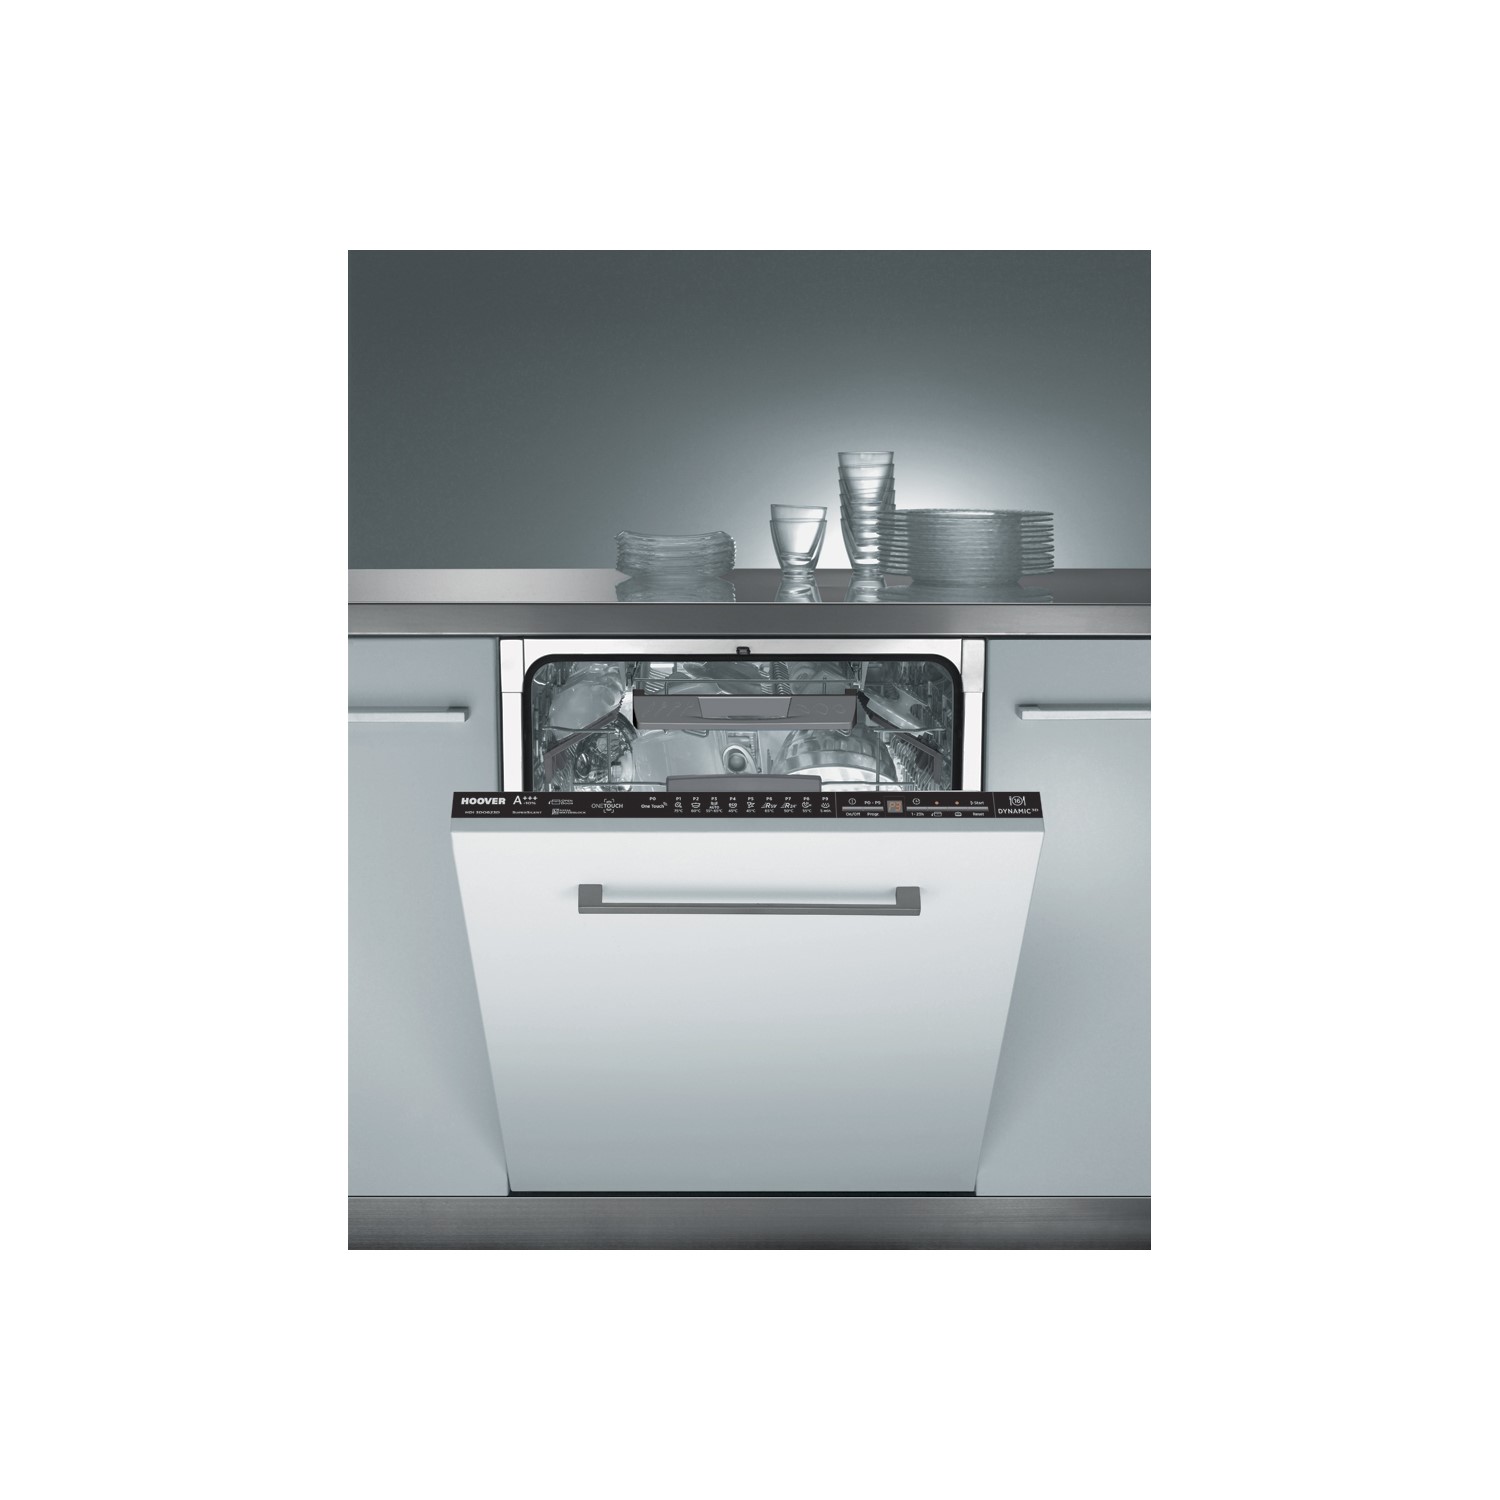 Place Fully Integrated Dishwasher 